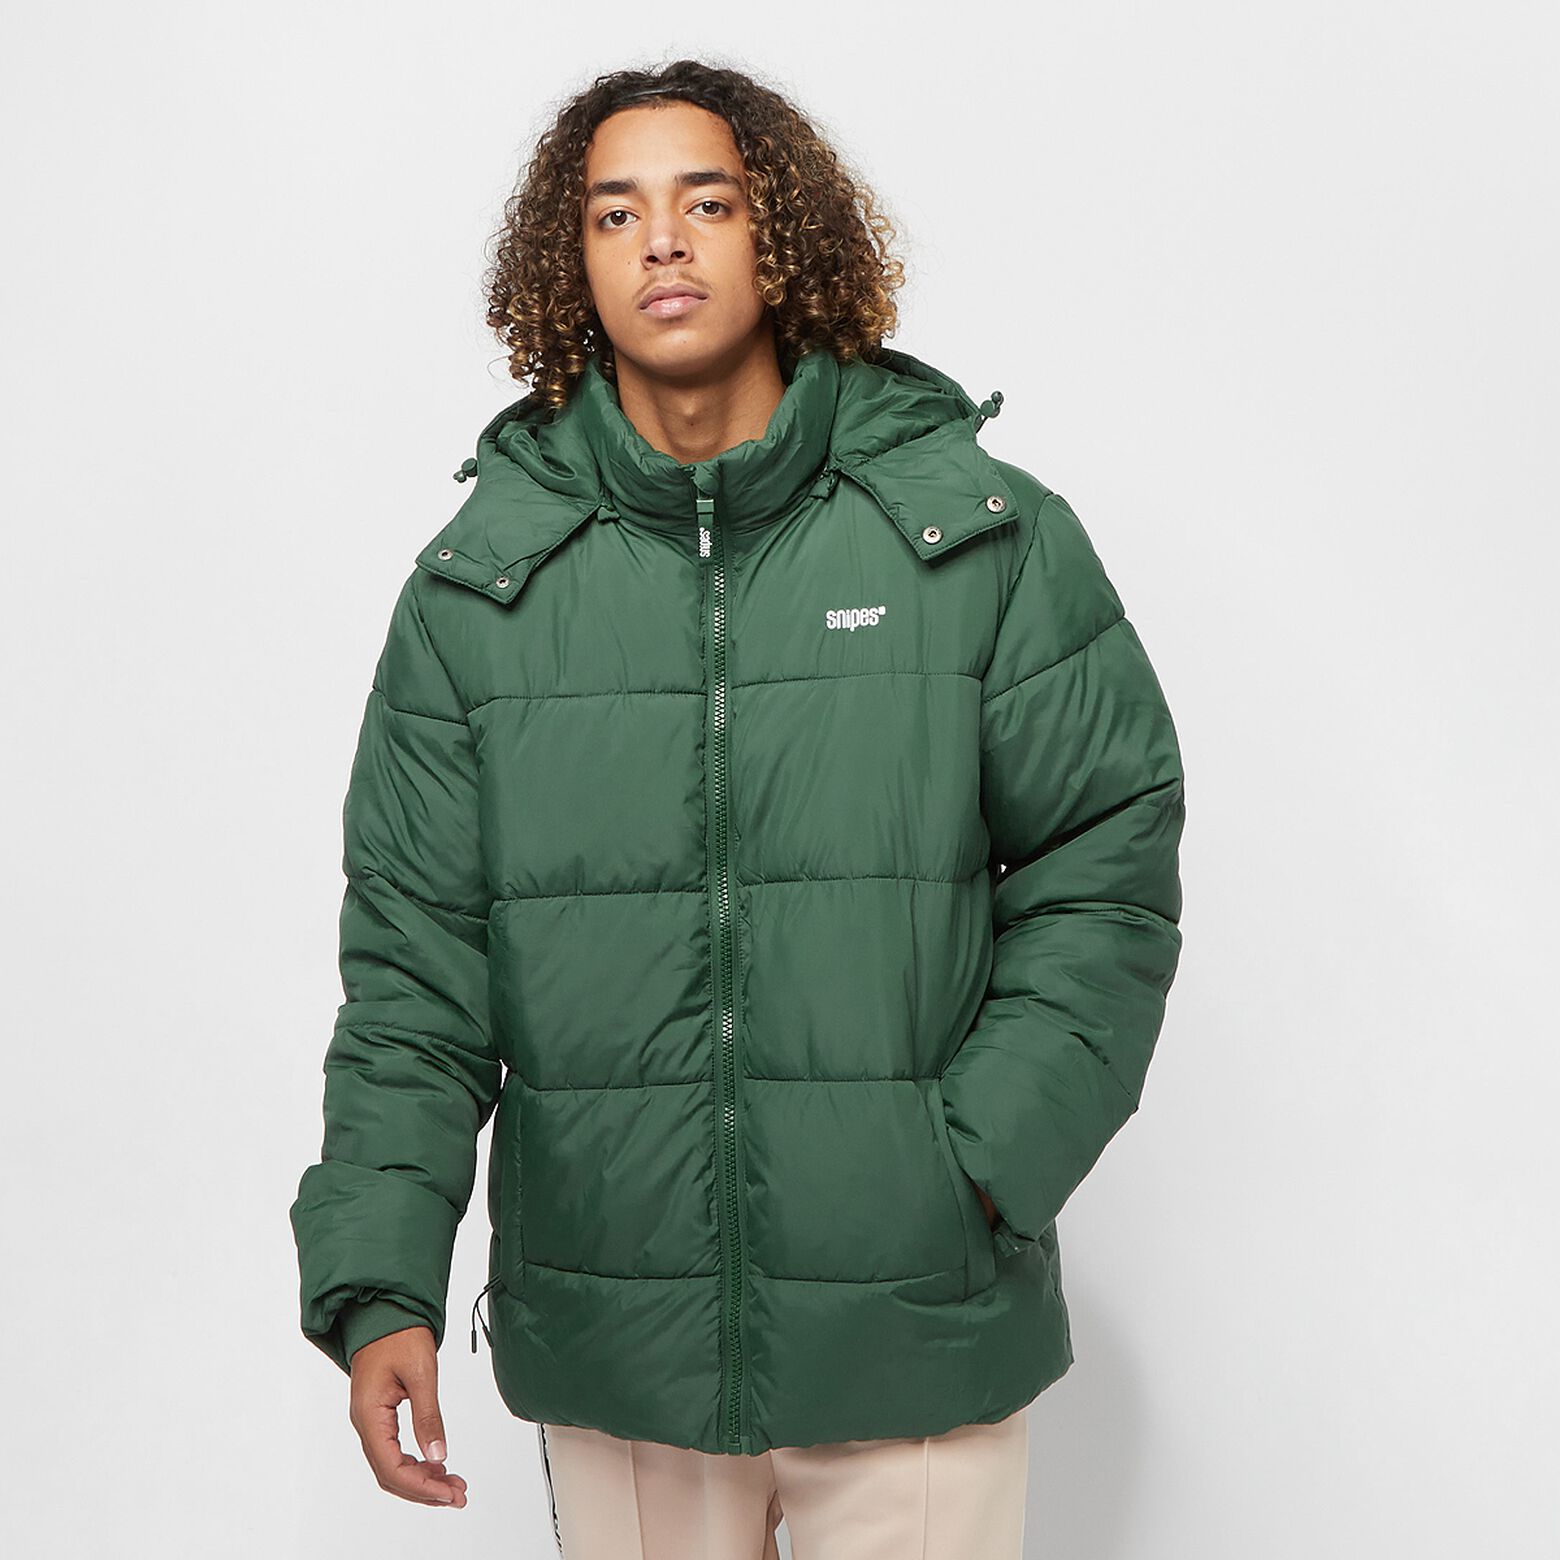 Snipes Small Logo puffer jack